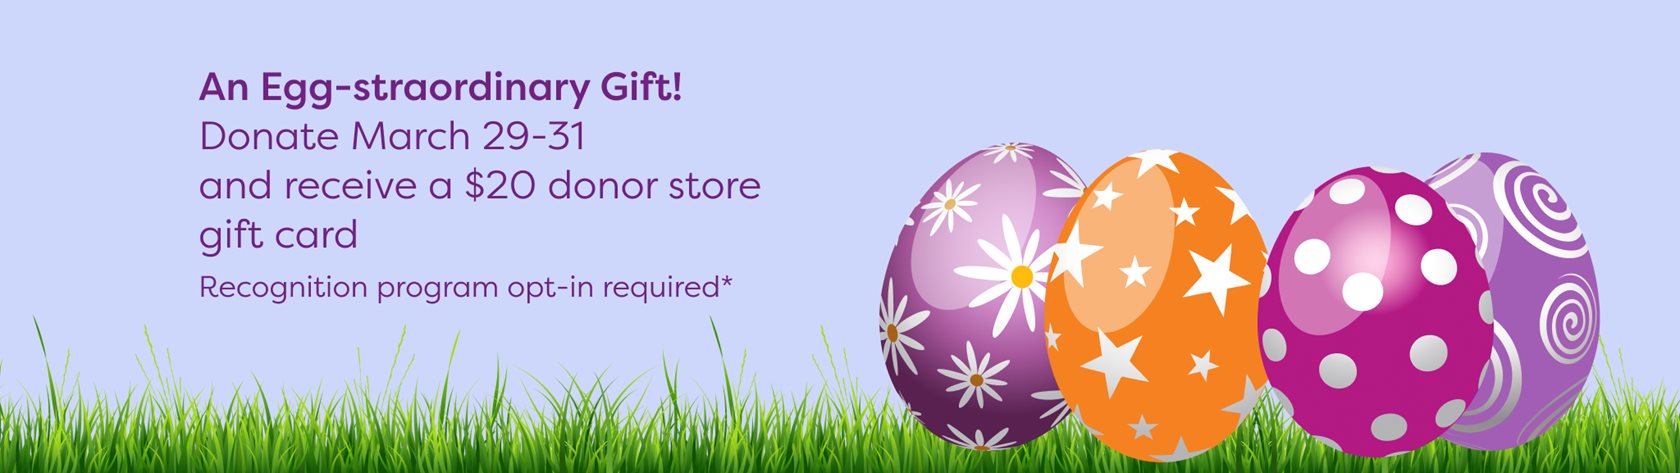 donate March 29-31 and receive a $20 donor store gift card